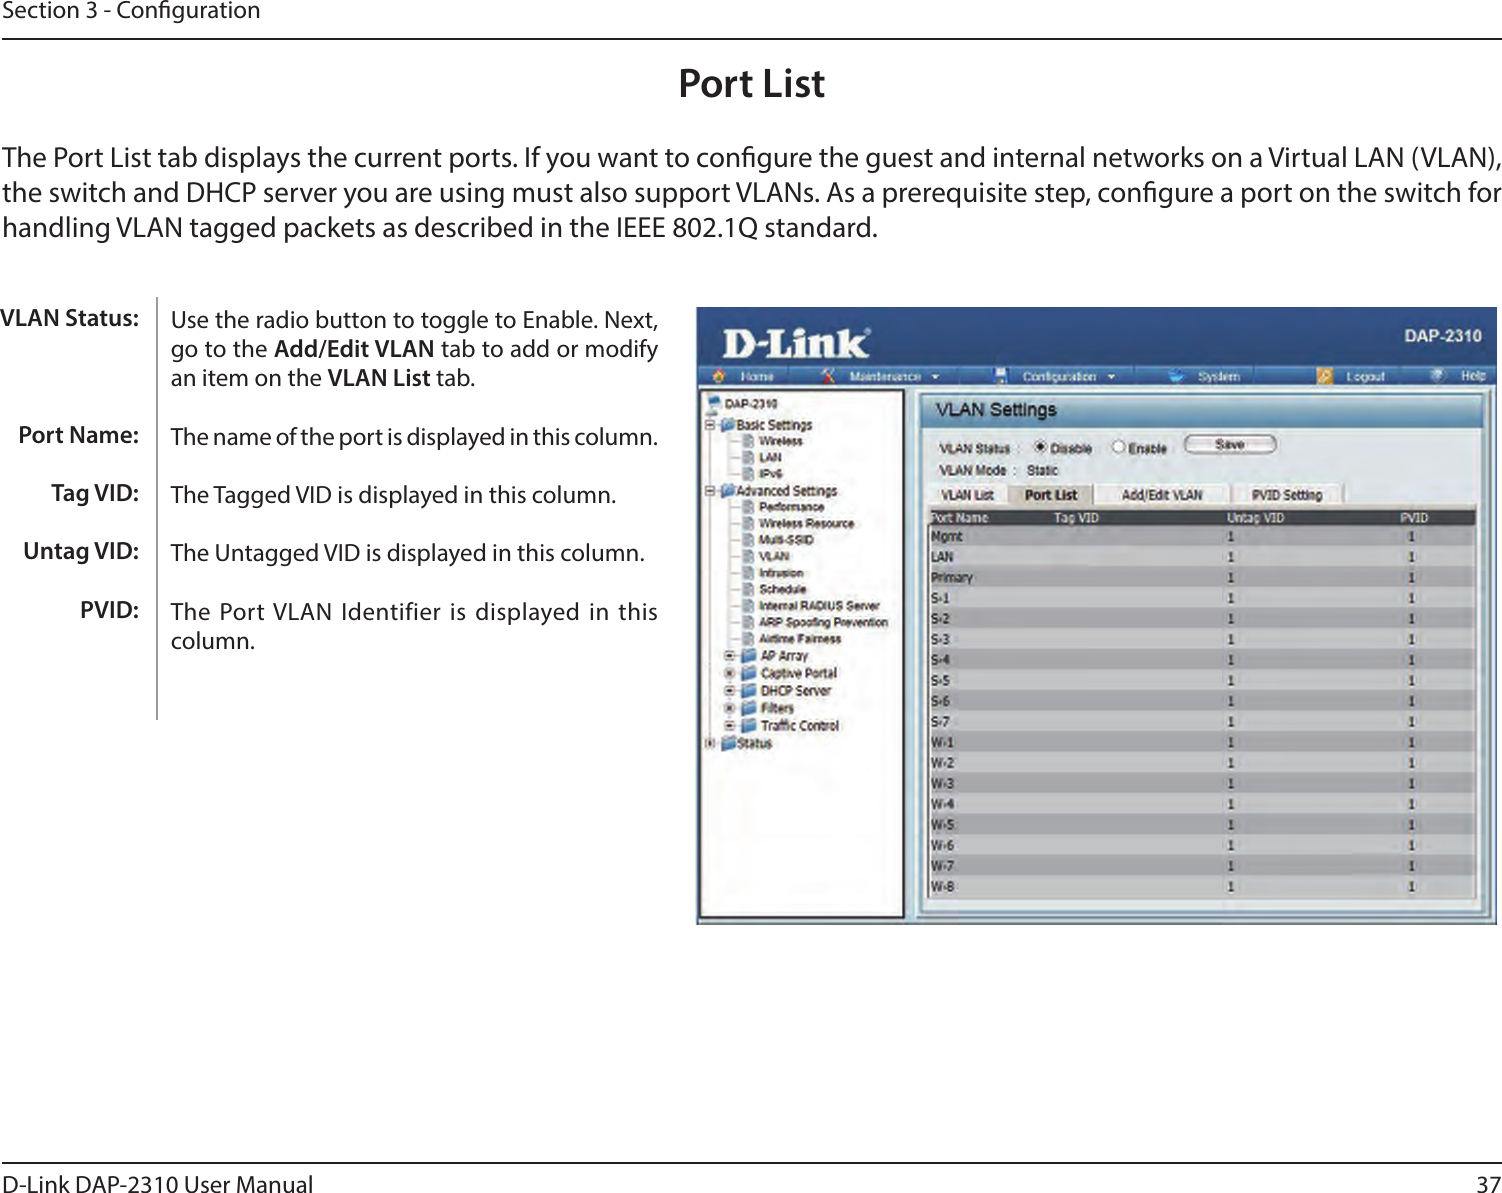 37D-Link DAP-2310 User ManualSection 3 - CongurationPort ListThe Port List tab displays the current ports. If you want to congure the guest and internal networks on a Virtual LAN (VLAN), the switch and DHCP server you are using must also support VLANs. As a prerequisite step, congure a port on the switch for handling VLAN tagged packets as described in the IEEE 802.1Q standard.Use the radio button to toggle to Enable. Next, go to the Add/Edit VLAN tab to add or modify an item on the VLAN List tab. The name of the port is displayed in this column.The Tagged VID is displayed in this column.The Untagged VID is displayed in this column.The Port VLAN  Identifier is displayed in  this column.VLAN Status:Port Name:Tag VID:Untag VID:PVID: